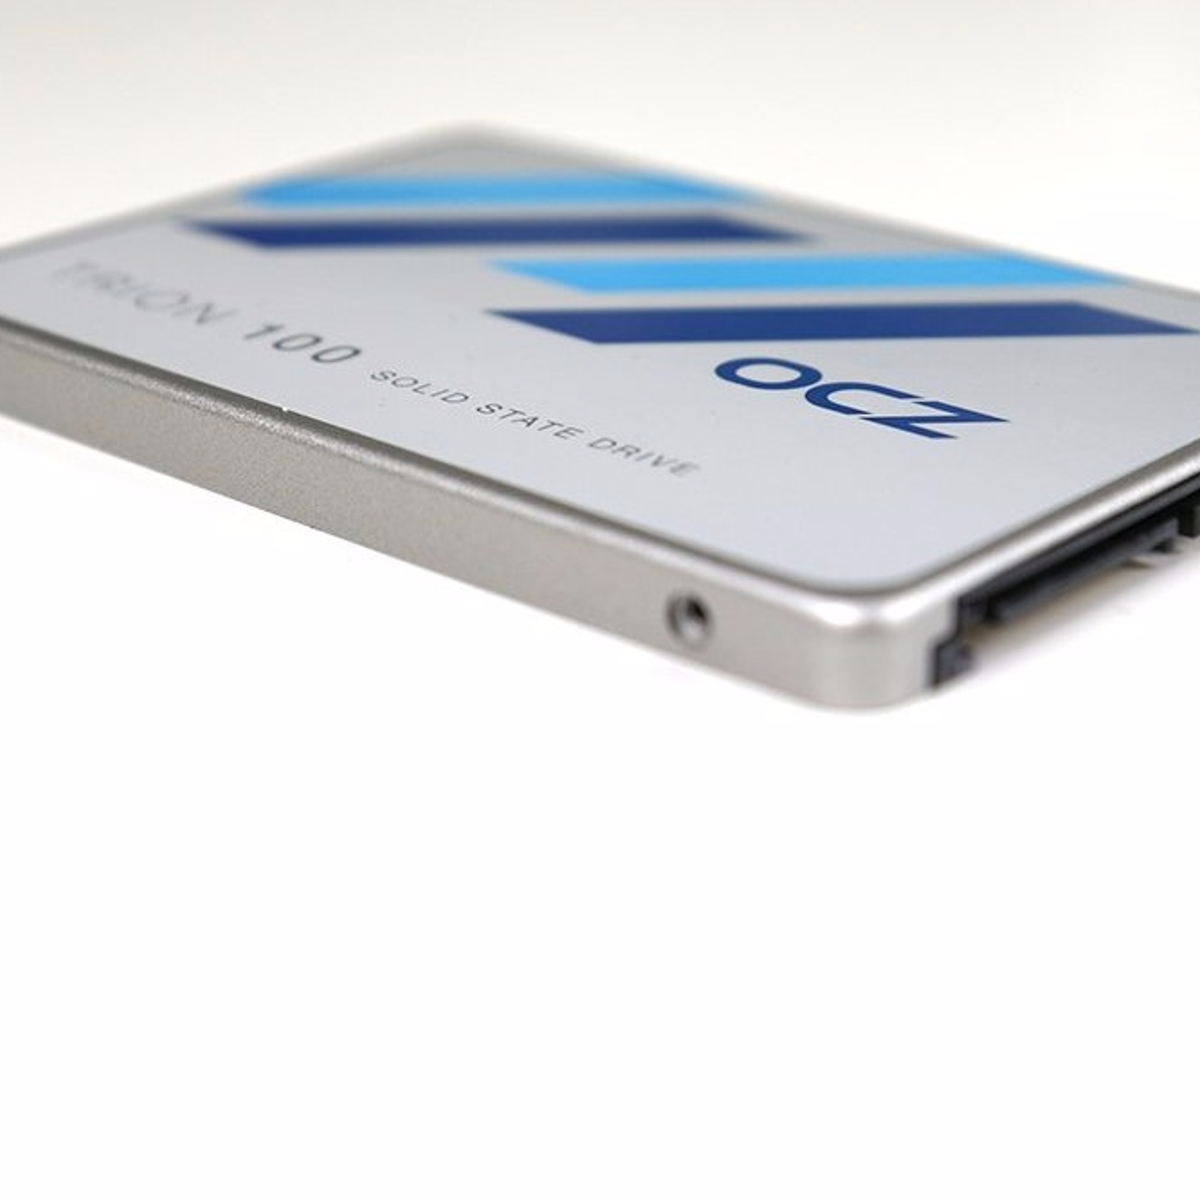 Is it time for a PS4 SSD upgrade?